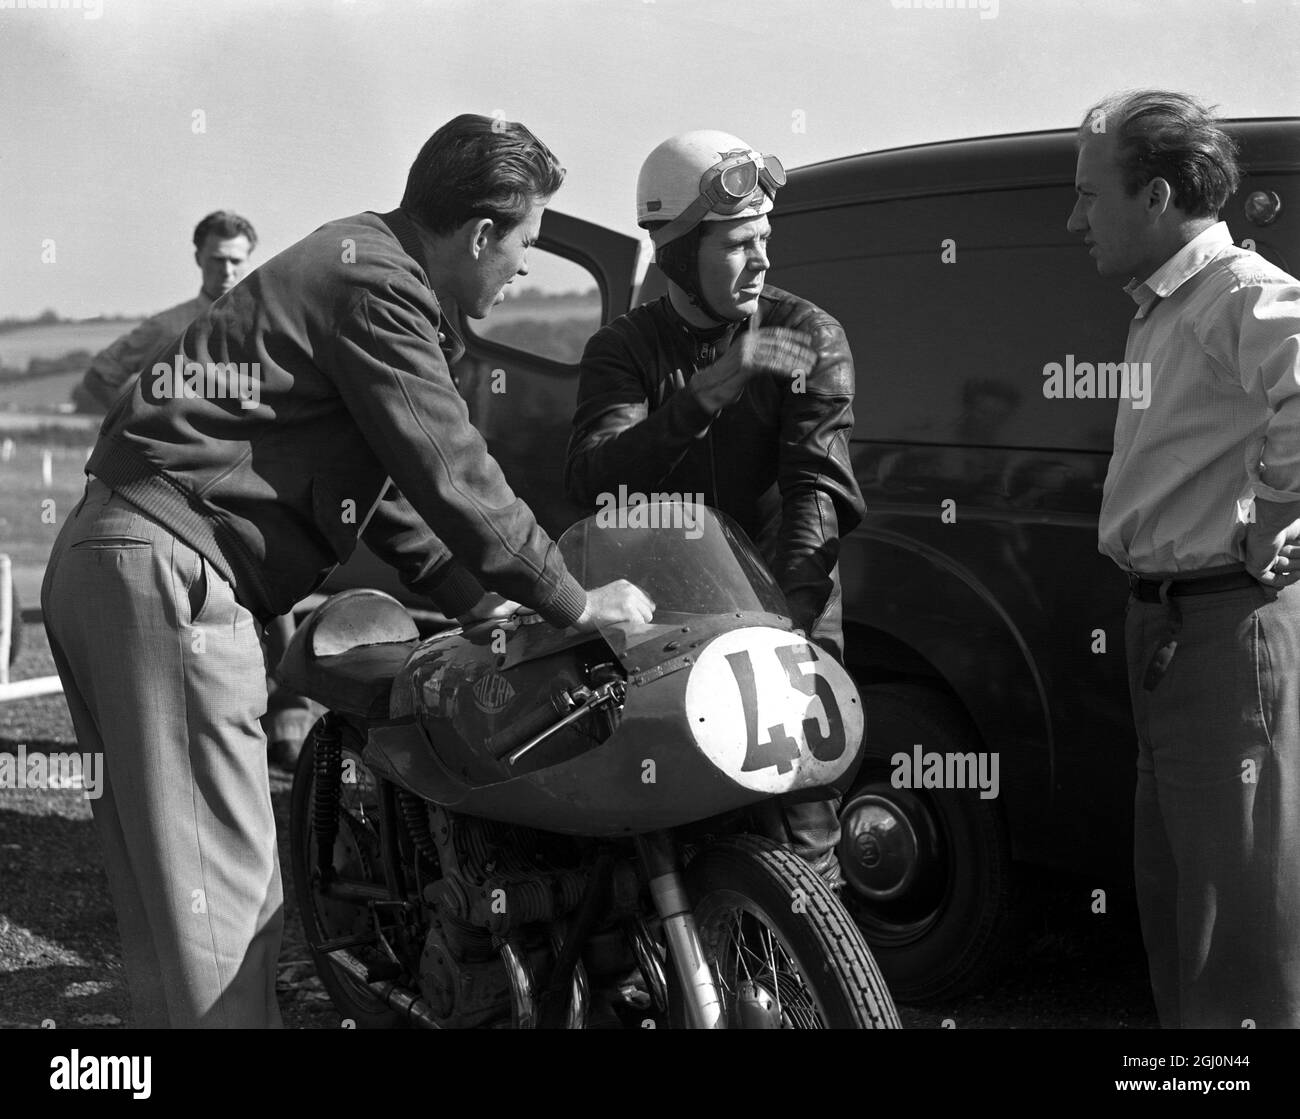 Geoff Duke , British world road racing motorcycle champion , talking with his mechanics during a break in practise at the Brands Hatch racing circuit in Kent . 24th September 1955 Stock Photo